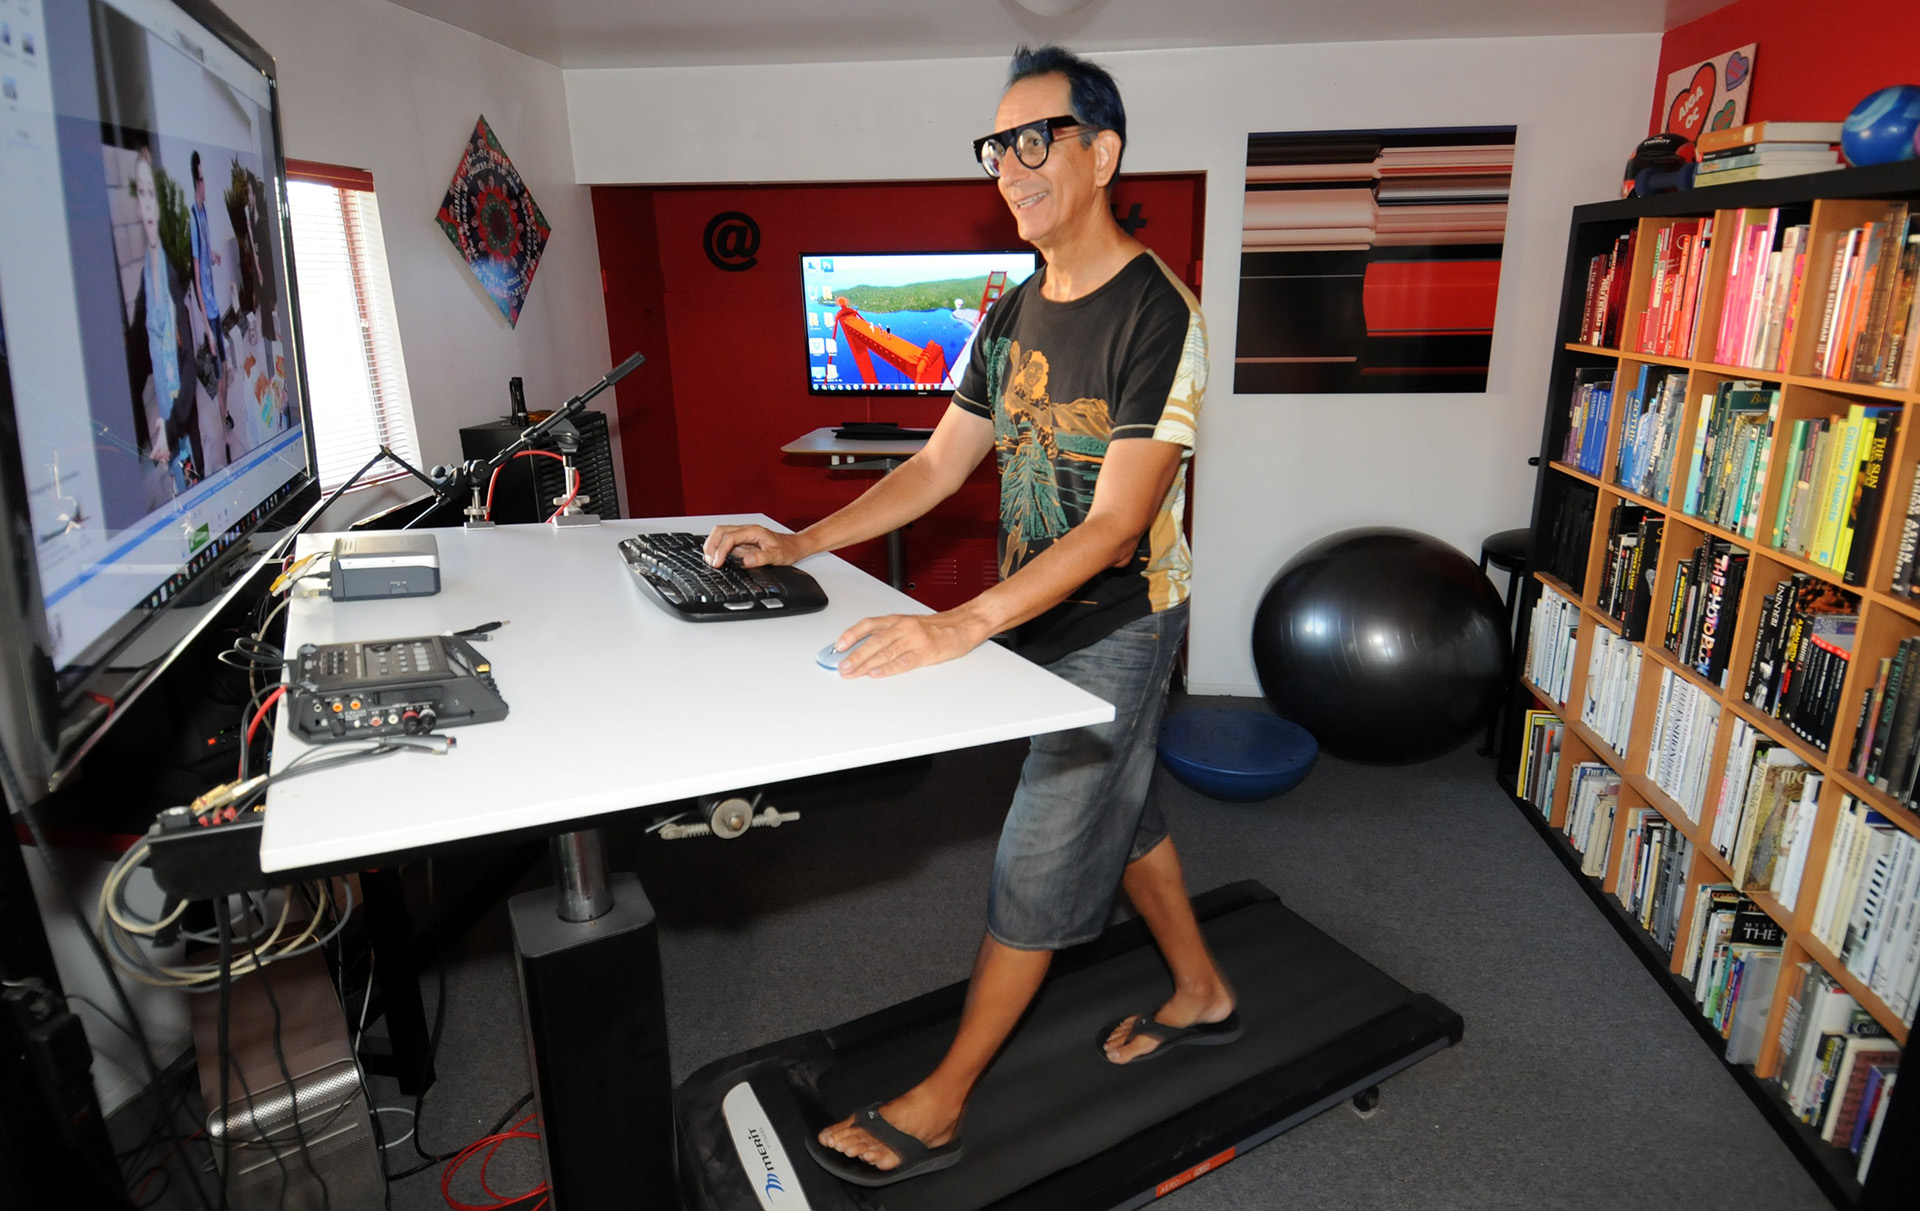 Glenn Zucman working on a Treadmill Desk with a 42" drafting table, 46" monitor, and nVidia GeForce 770 graphics workstation